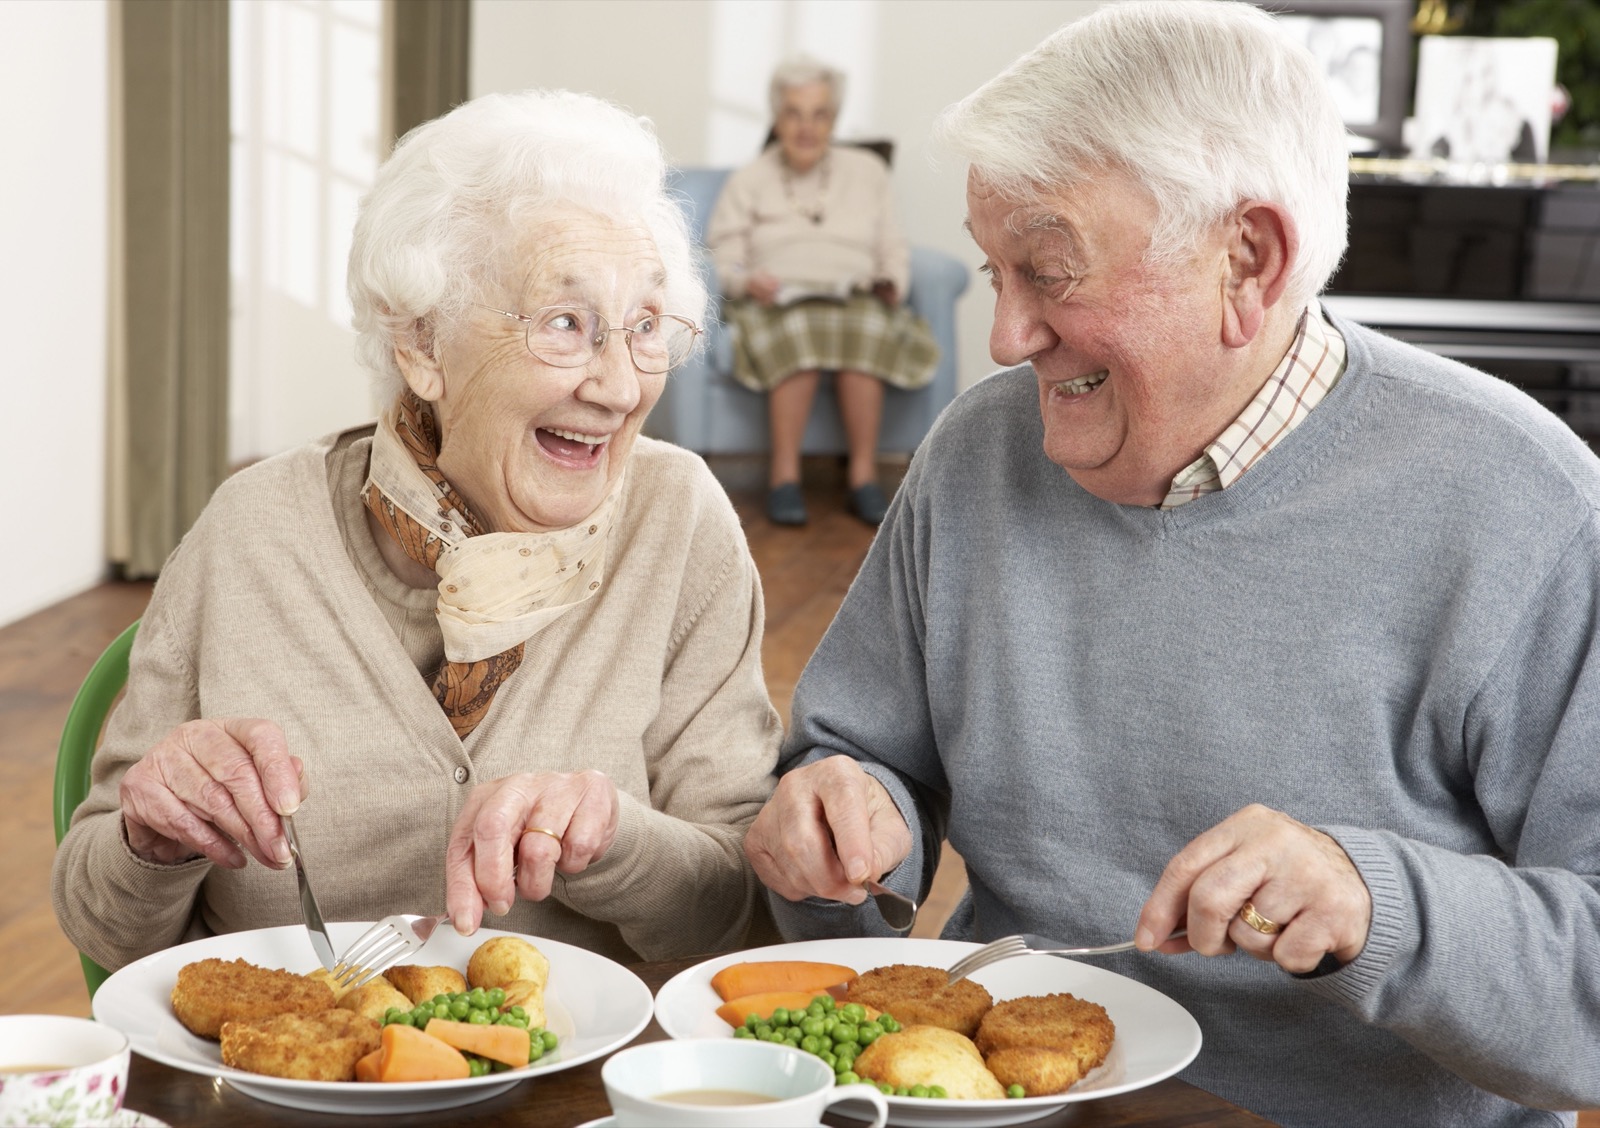 You're a Senior Citizen! Your Choice on the Superior Version of These Foods Will Reveal Your Age